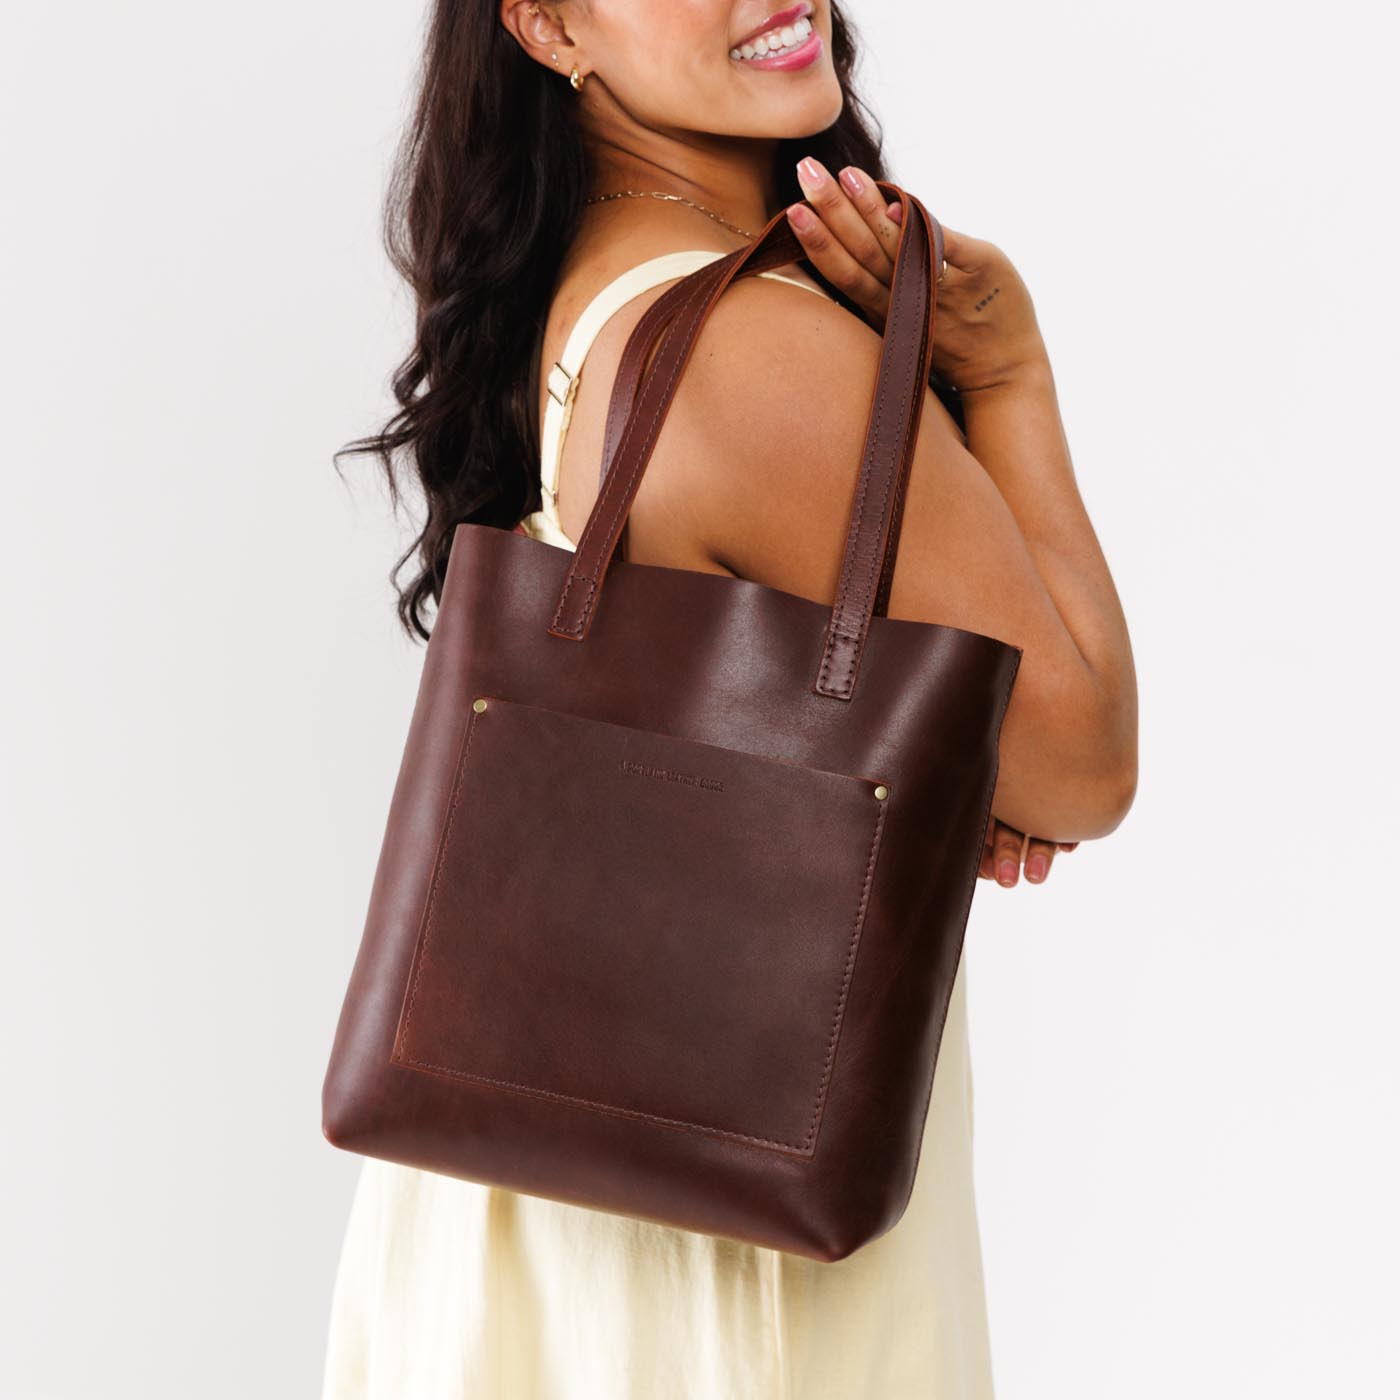  Cognac | Medium Tote with dual shoulder straps and crossbody strap